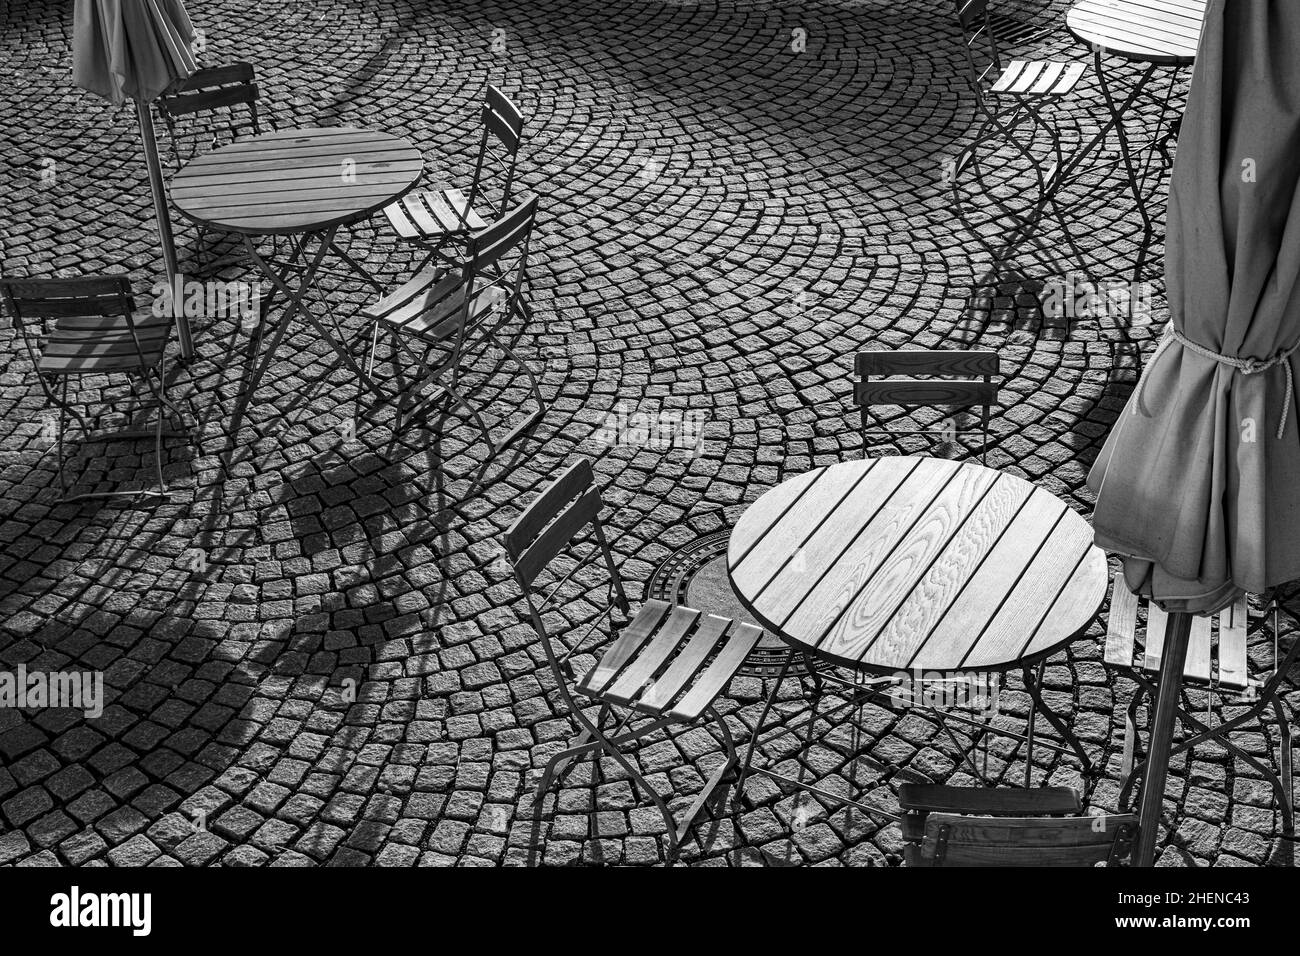 Outdoor German cafe seating with round tables and wooden  chairs Stock Photo